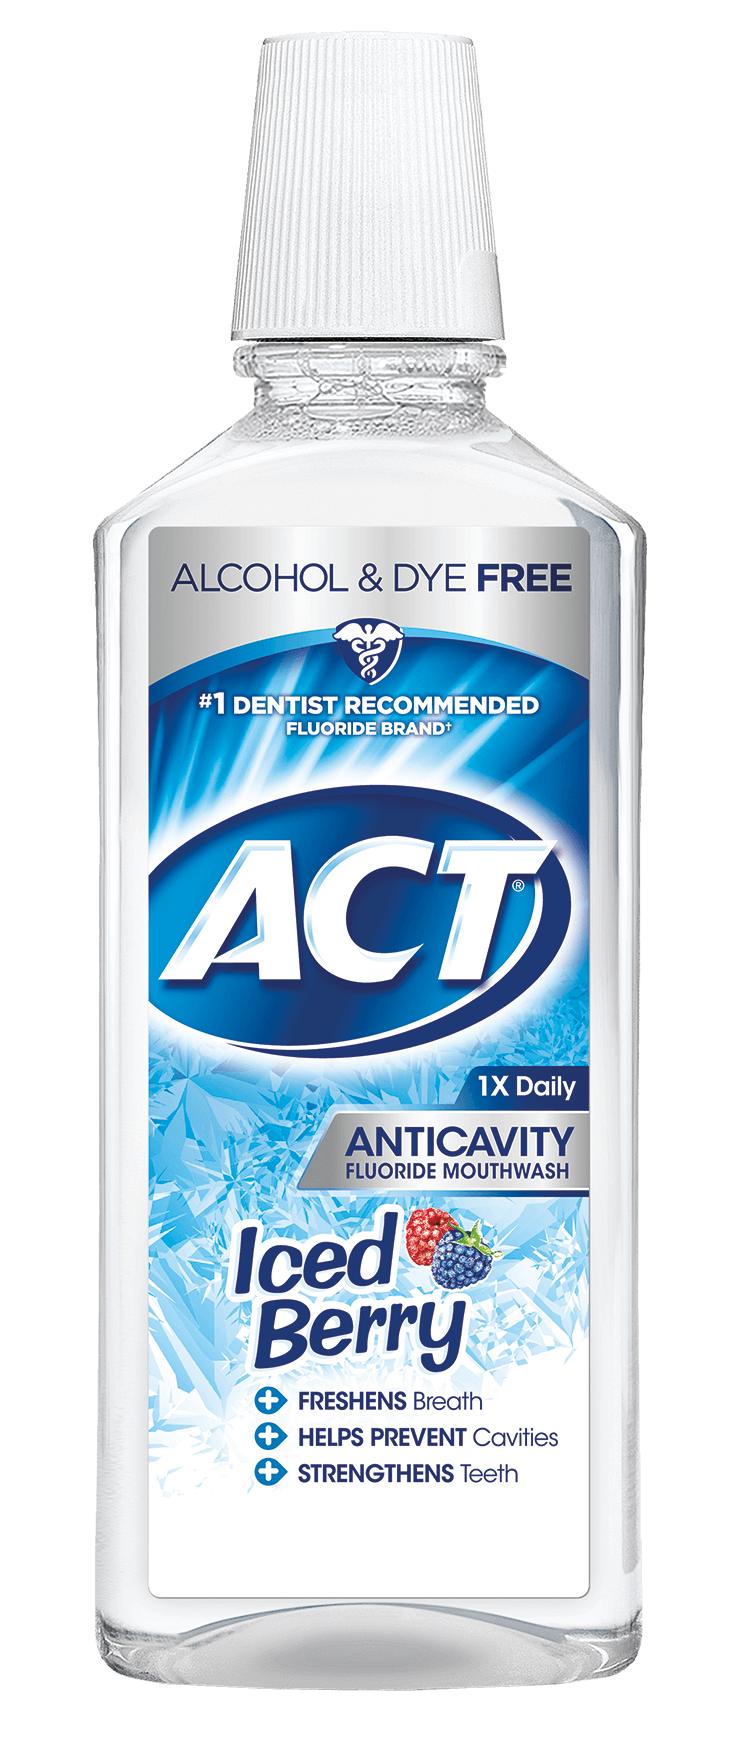 ACT® Iced Berry Anticavity Fluoride Mouthwash